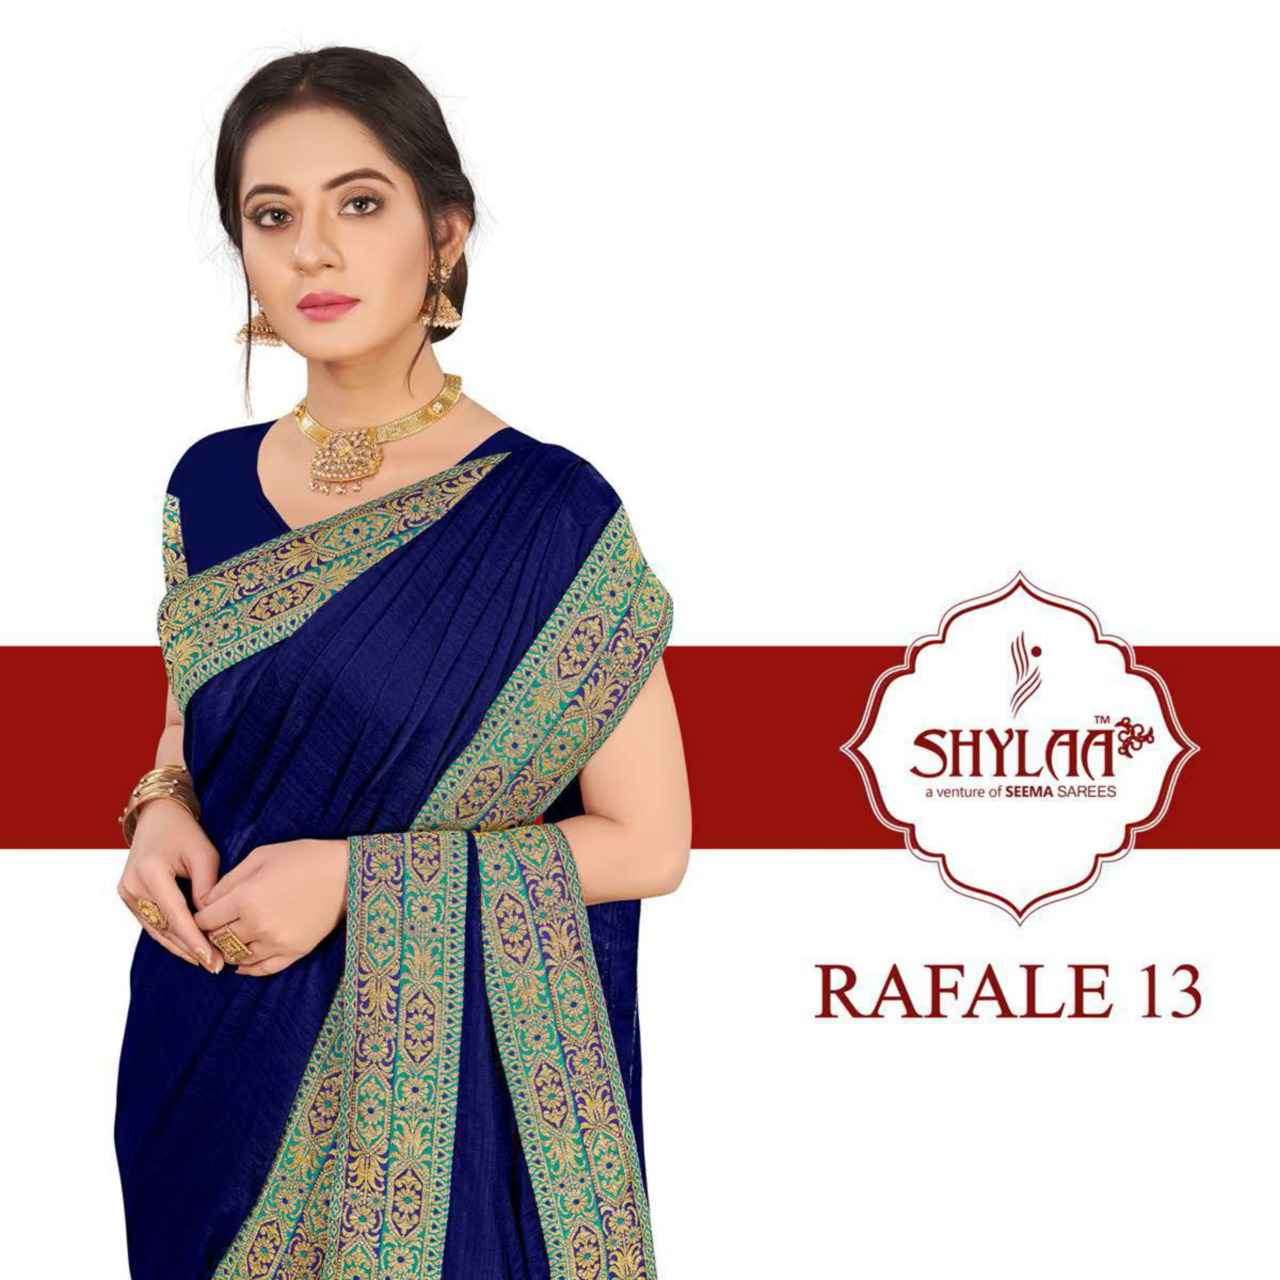 Shhylaa Rafale 13 Exclusive Chiffon Saree New Collection at Best Rate